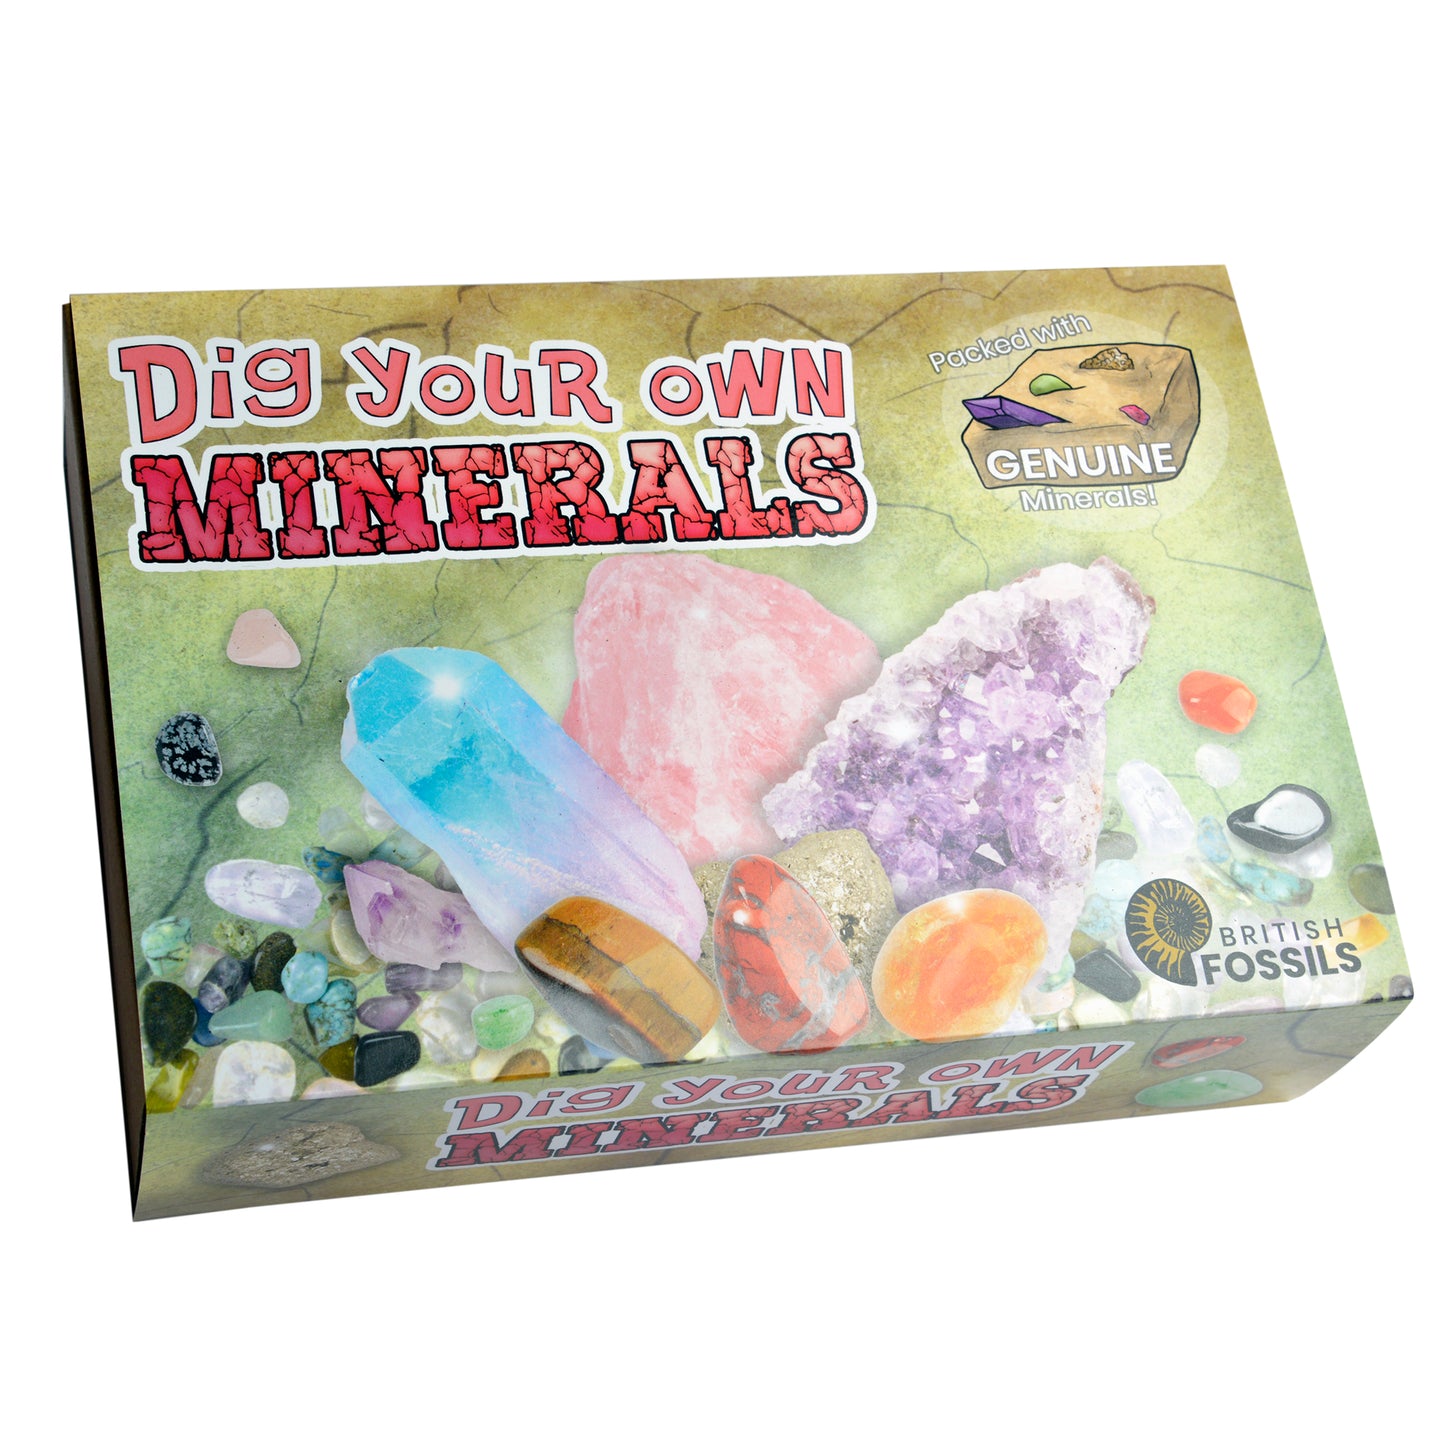 Dig your own Minerals